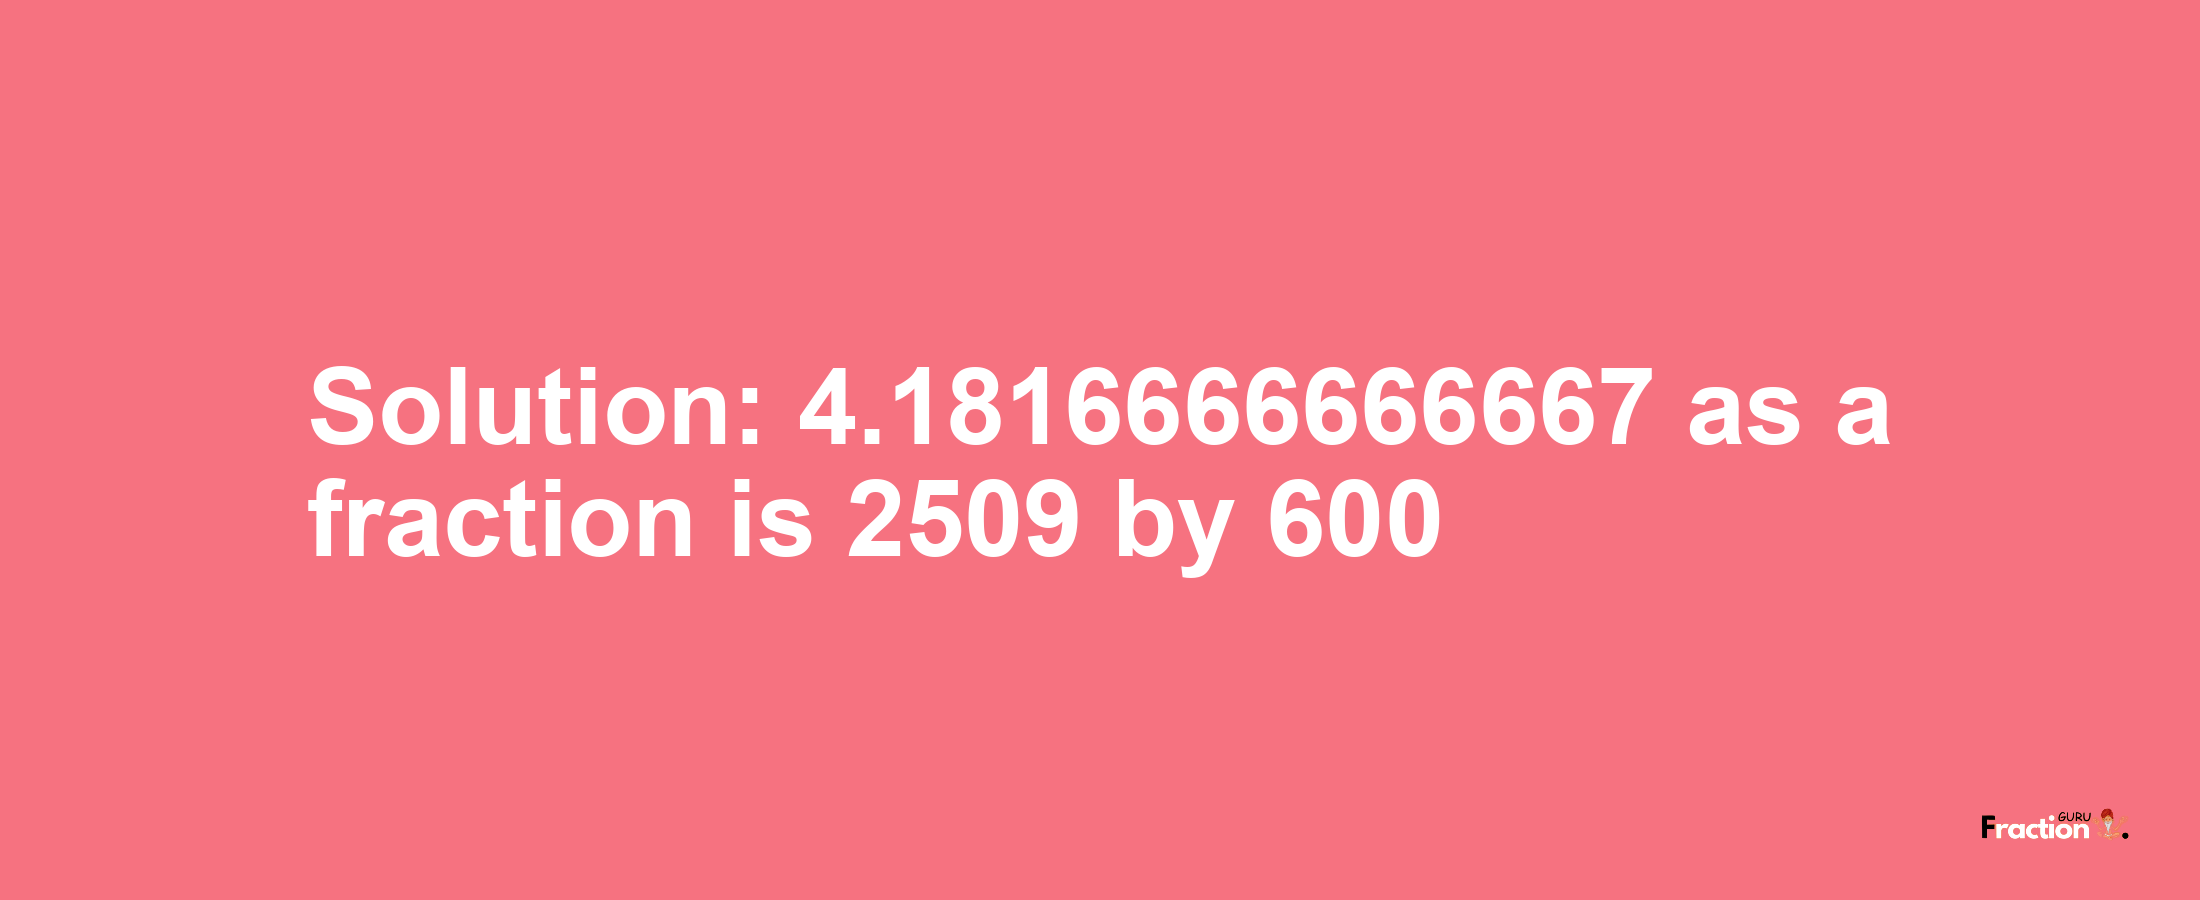 Solution:4.1816666666667 as a fraction is 2509/600